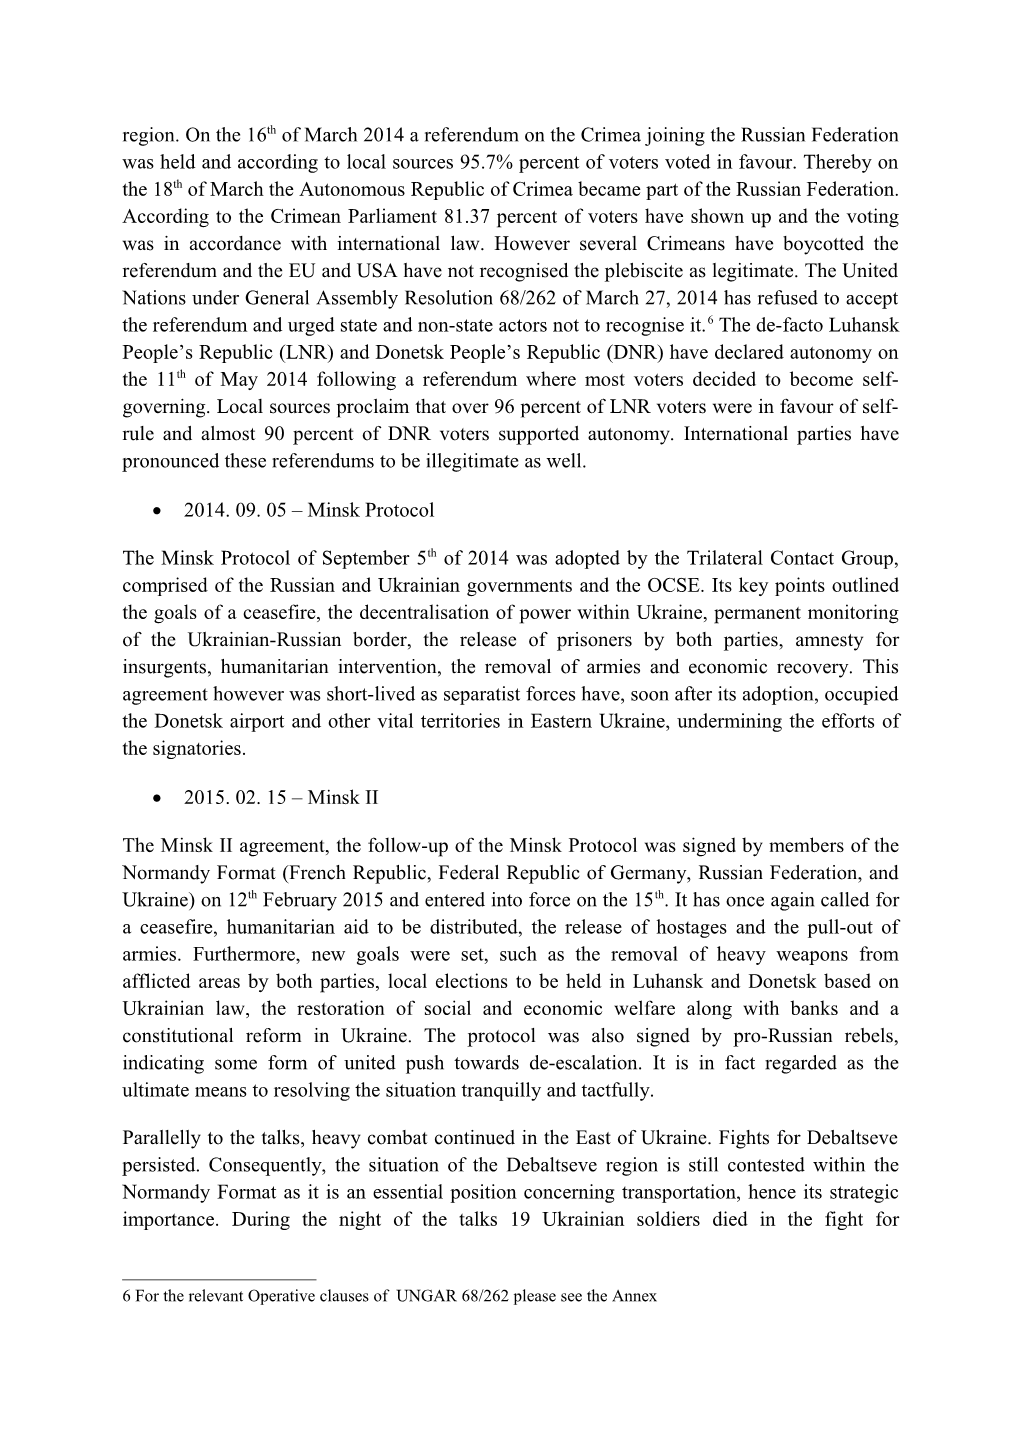 ISSUE OF:Implementing Measures to Prevent Cease-Fire Violations in Ukraine